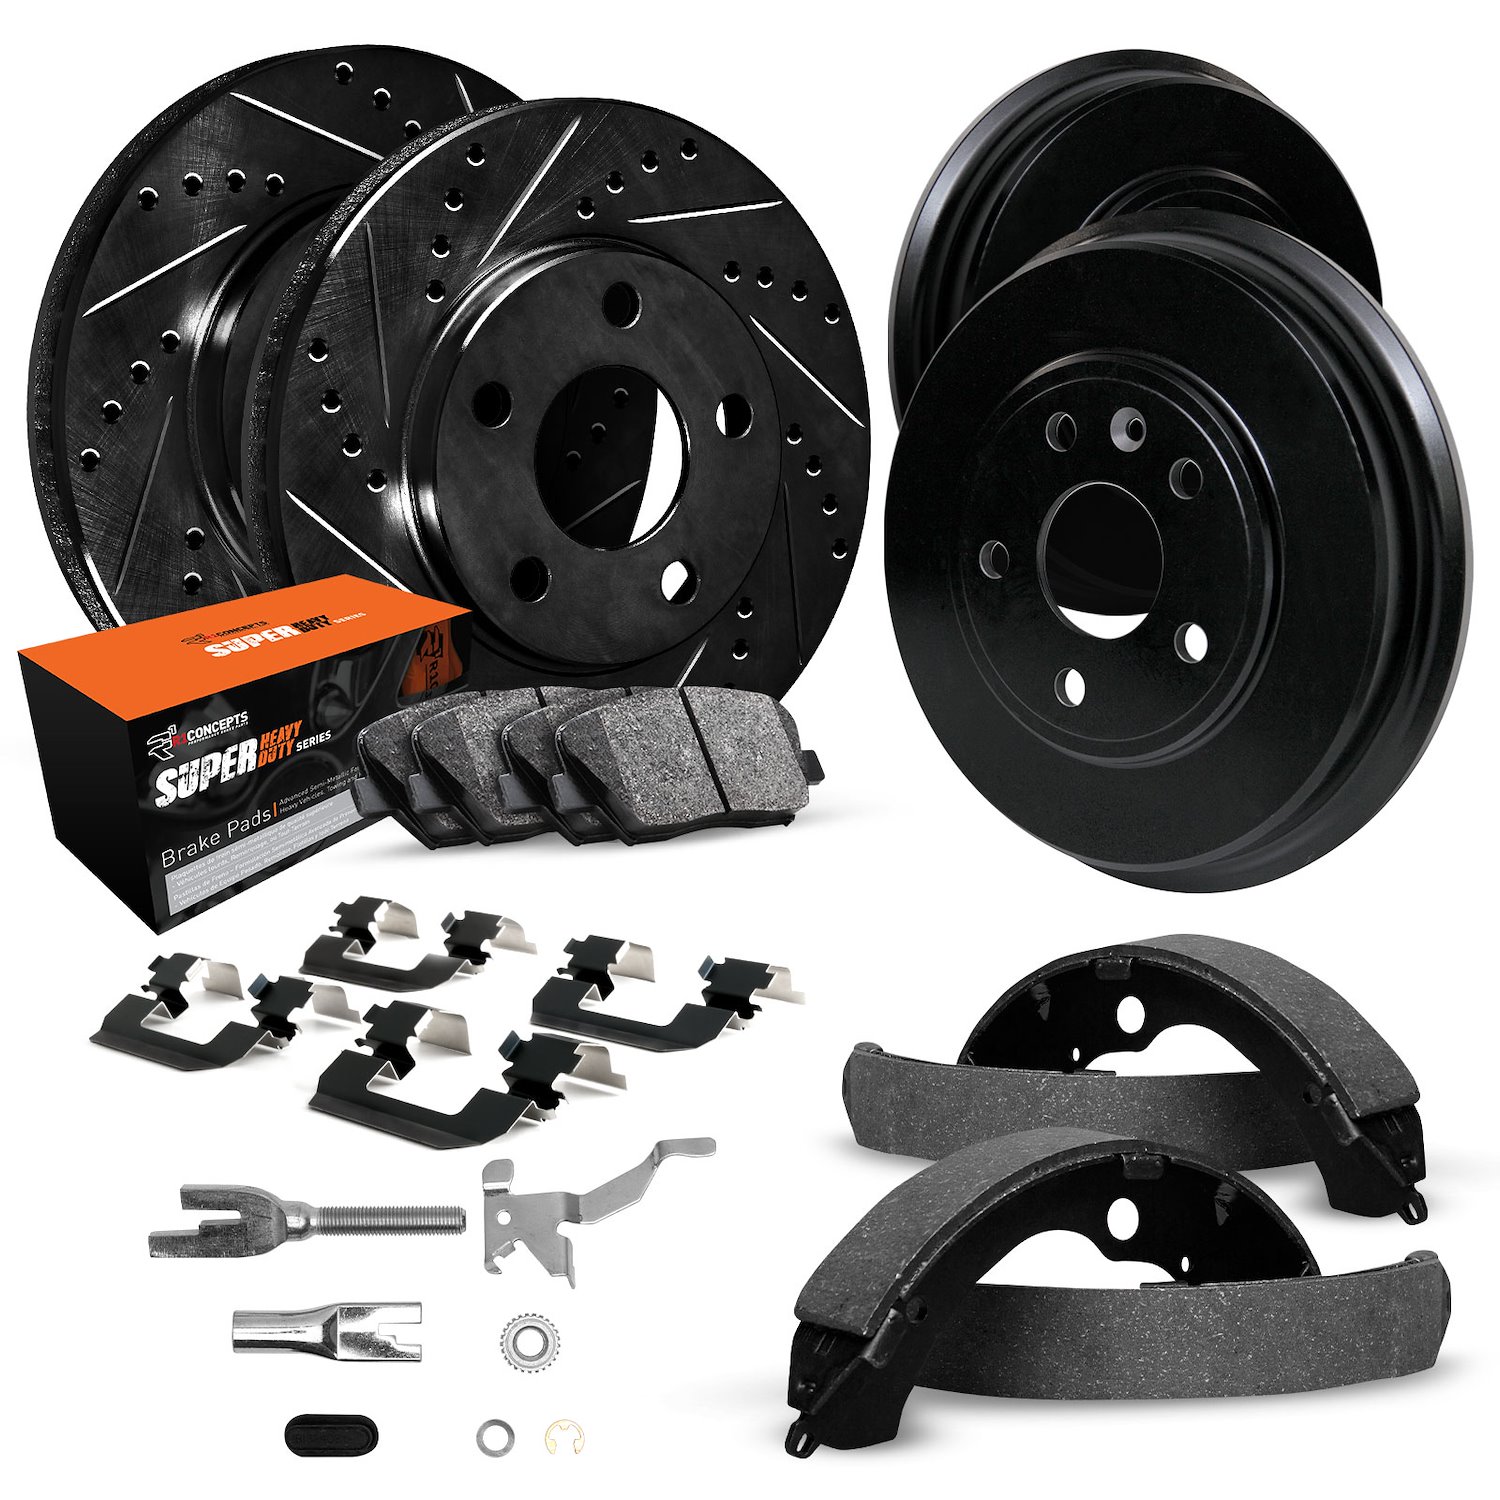 E-Line Drilled/Slotted Black Rotor & Drum Set w/Super-Duty Pads, Shoes, Hardware/Adjusters, 1995-1999 Ford/Lincoln/Mercury/Mazda